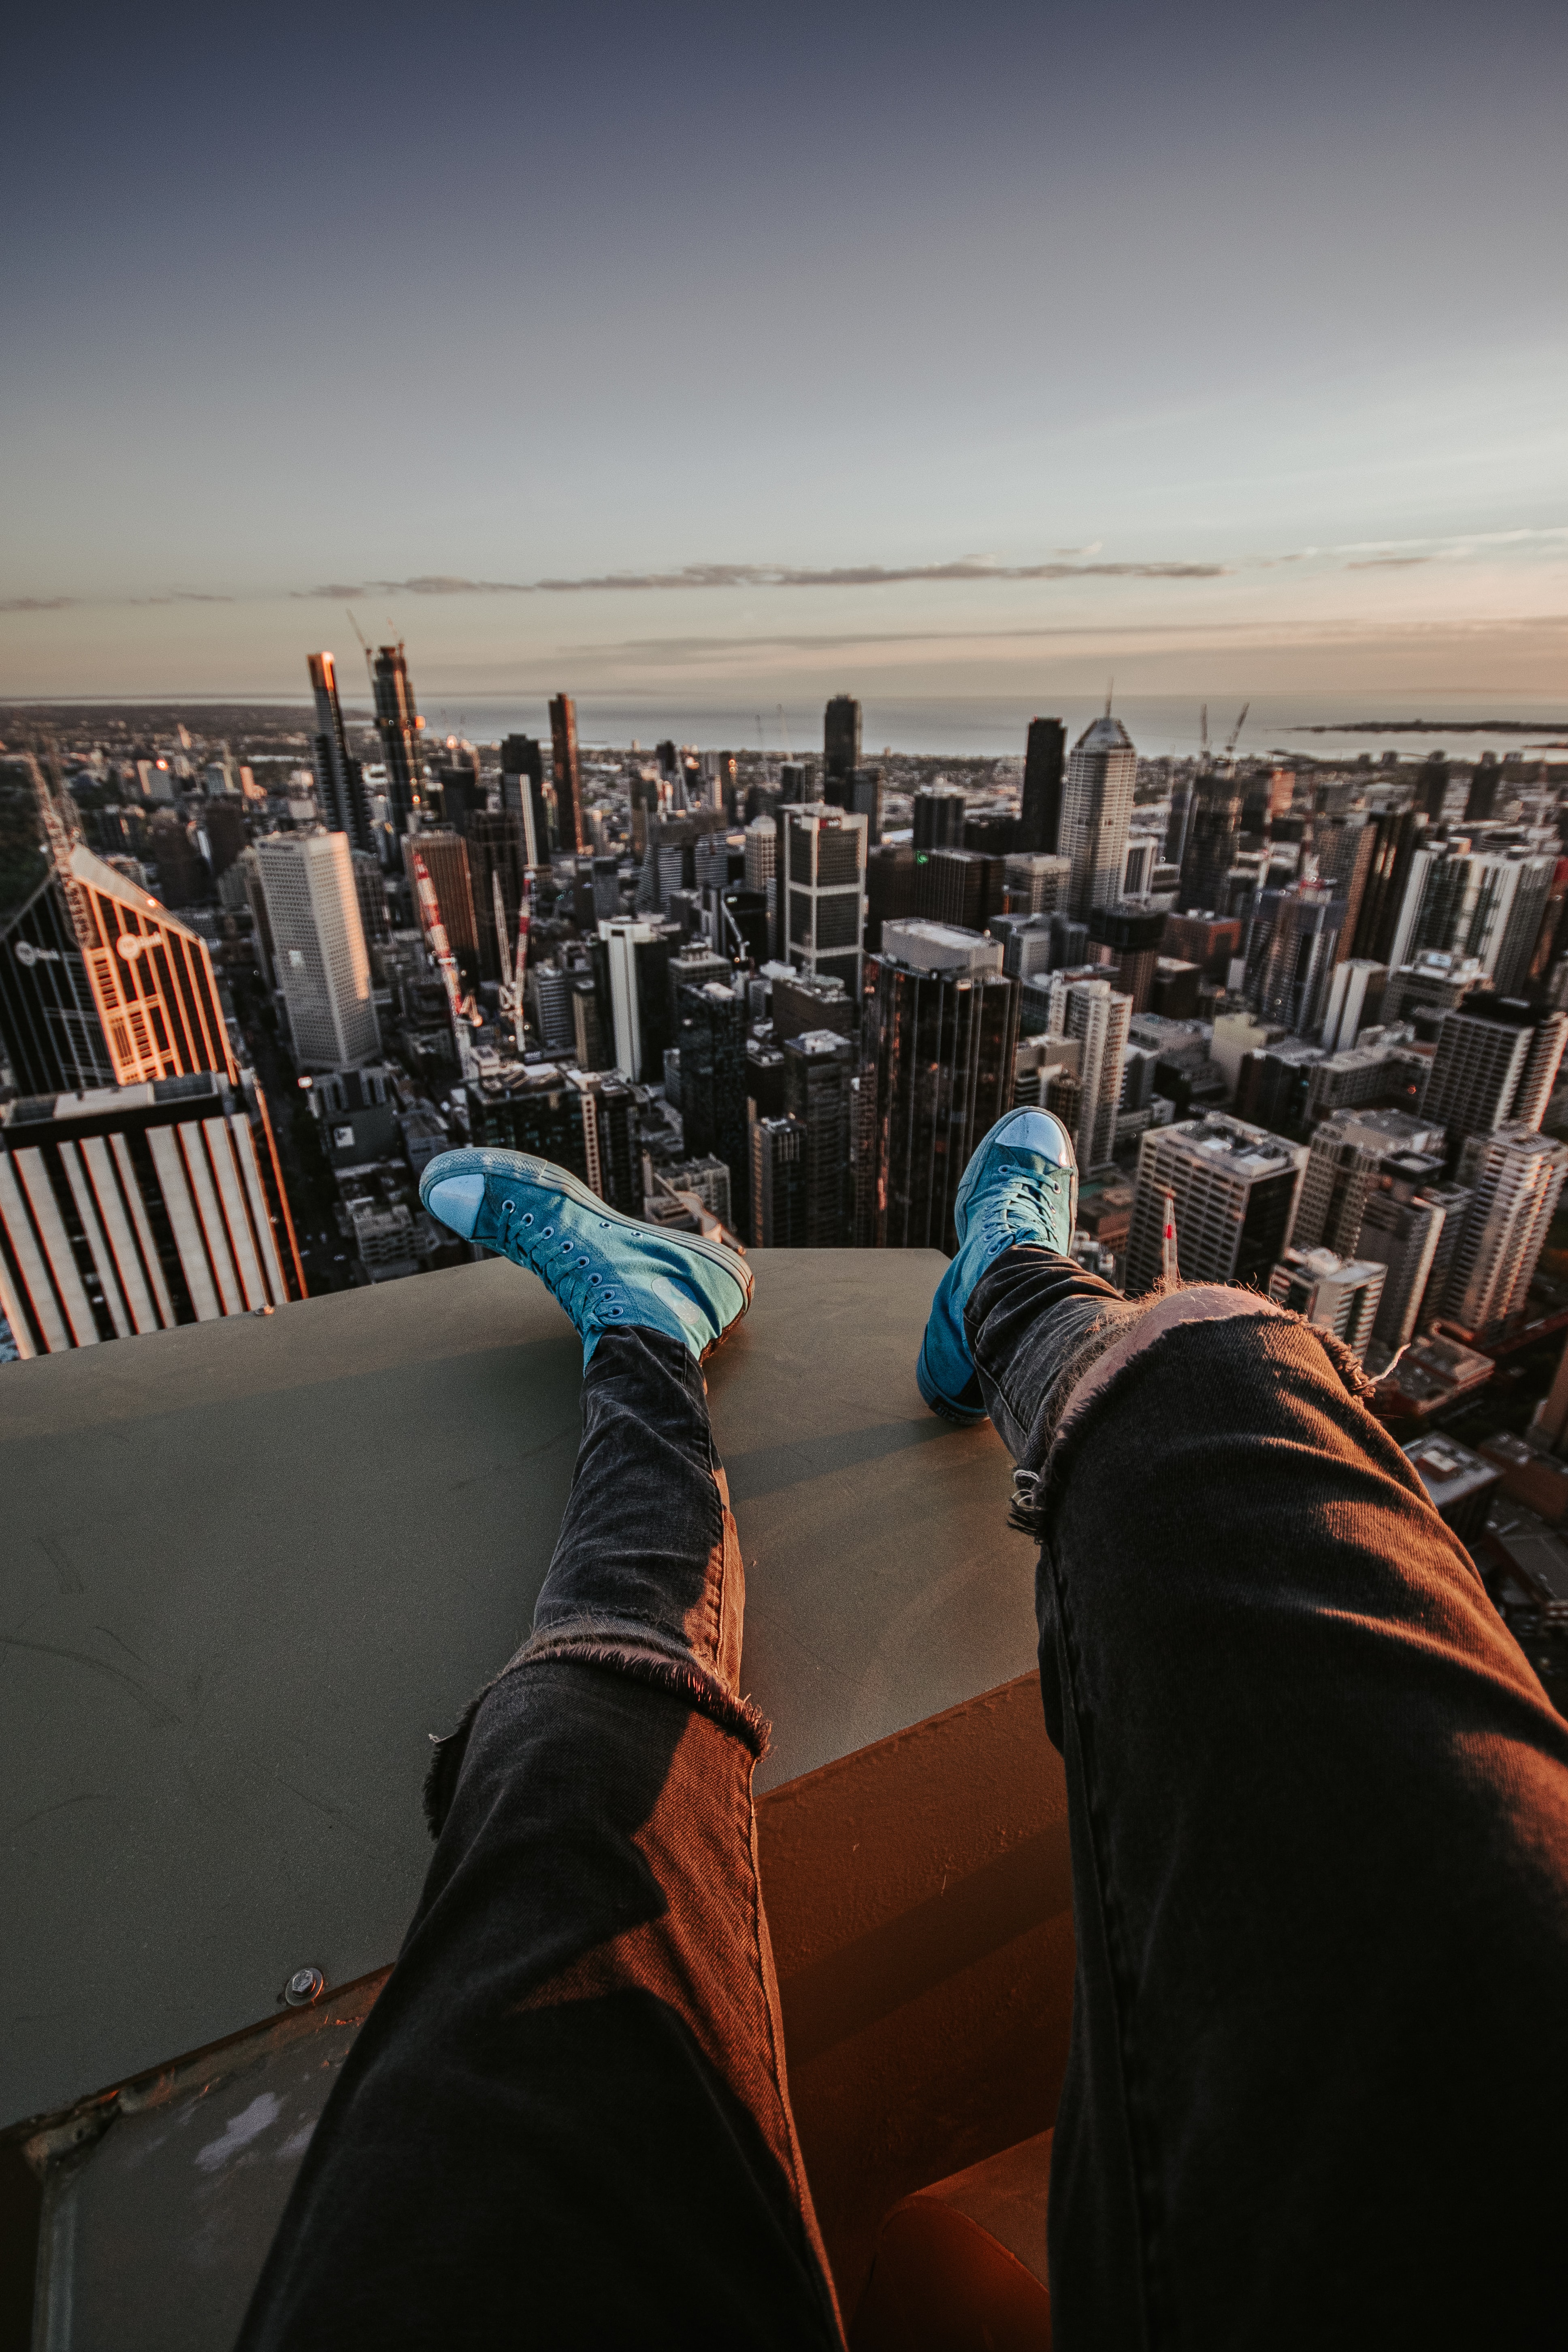 shoes, city, view from above, miscellanea, miscellaneous, legs, sneakers